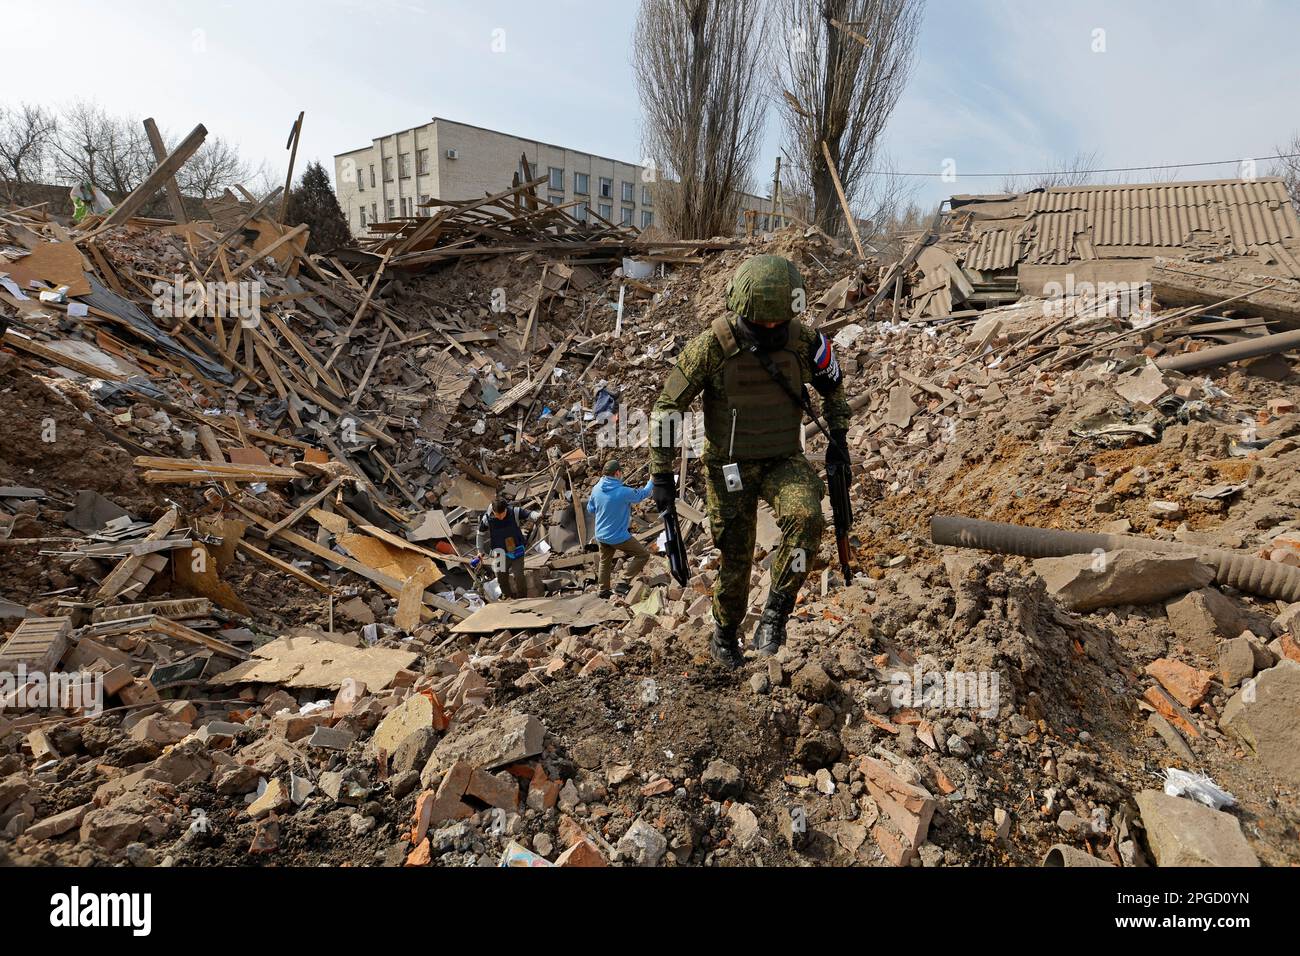 A member of the Russian Investigative Committee walks out of a shell crater in the ruins of the water supply station building destroyed by recent shelling in the course of Russia-Ukraine conflict in Donetsk, Russian-controlled Ukraine, March 22, 2023. REUTERS/Alexander Ermochenko Stock Photo